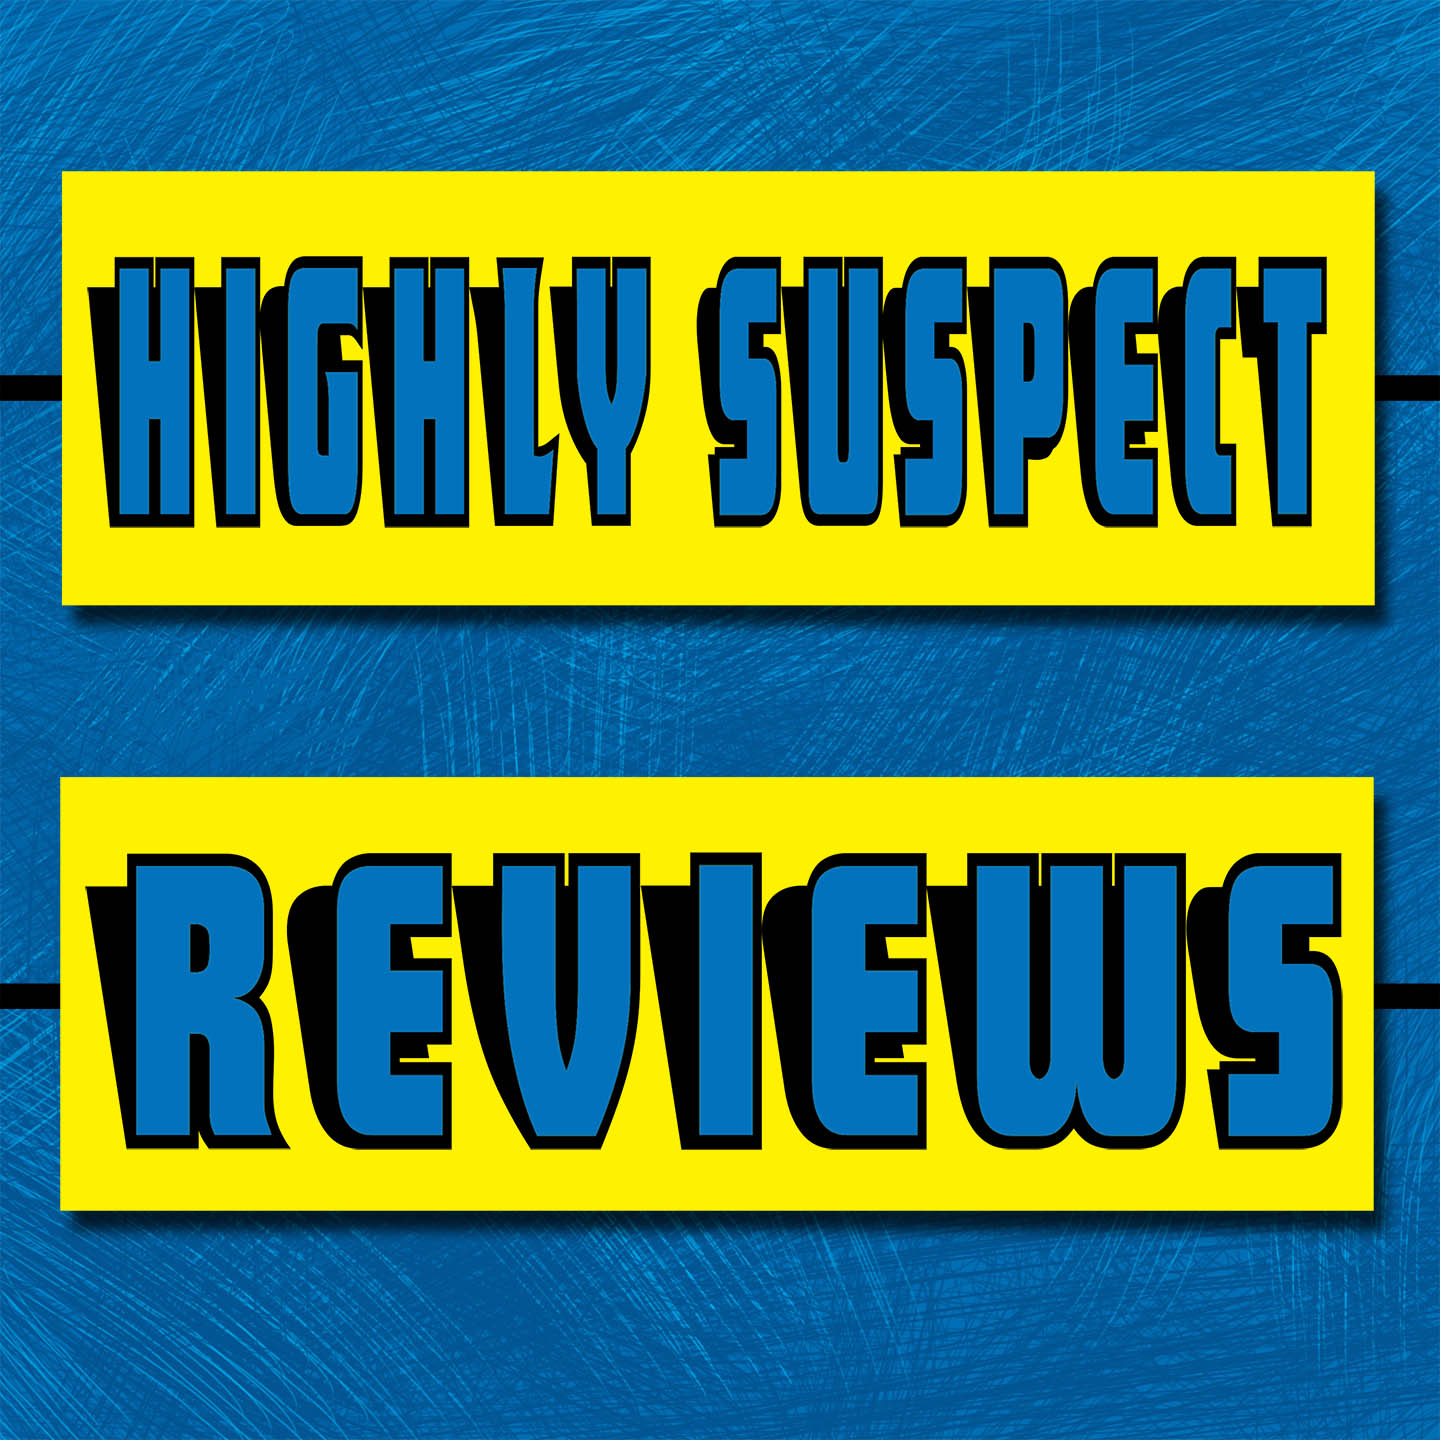 Highly Suspect Reviews